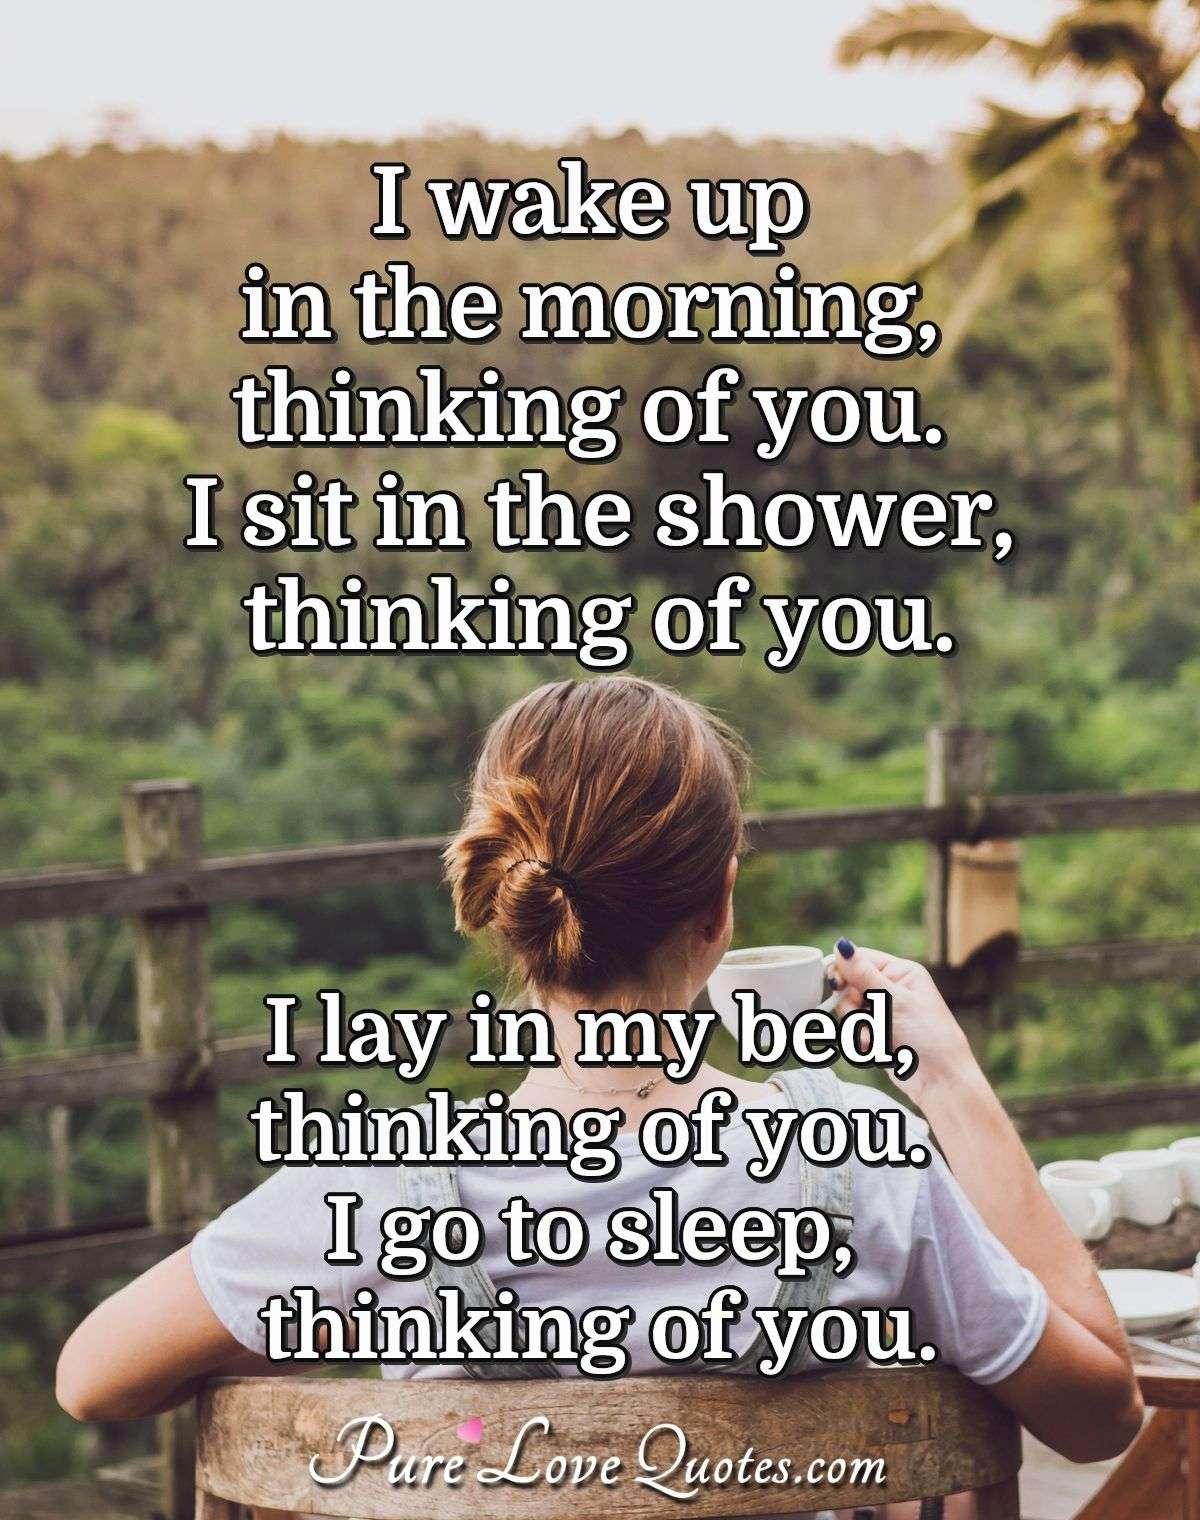 I wake up in the morning, thinking of you. I sit in the shower, thinking of you. I lay in my bed, thinking of you. I go to sleep, thinking of you. - Anonymous